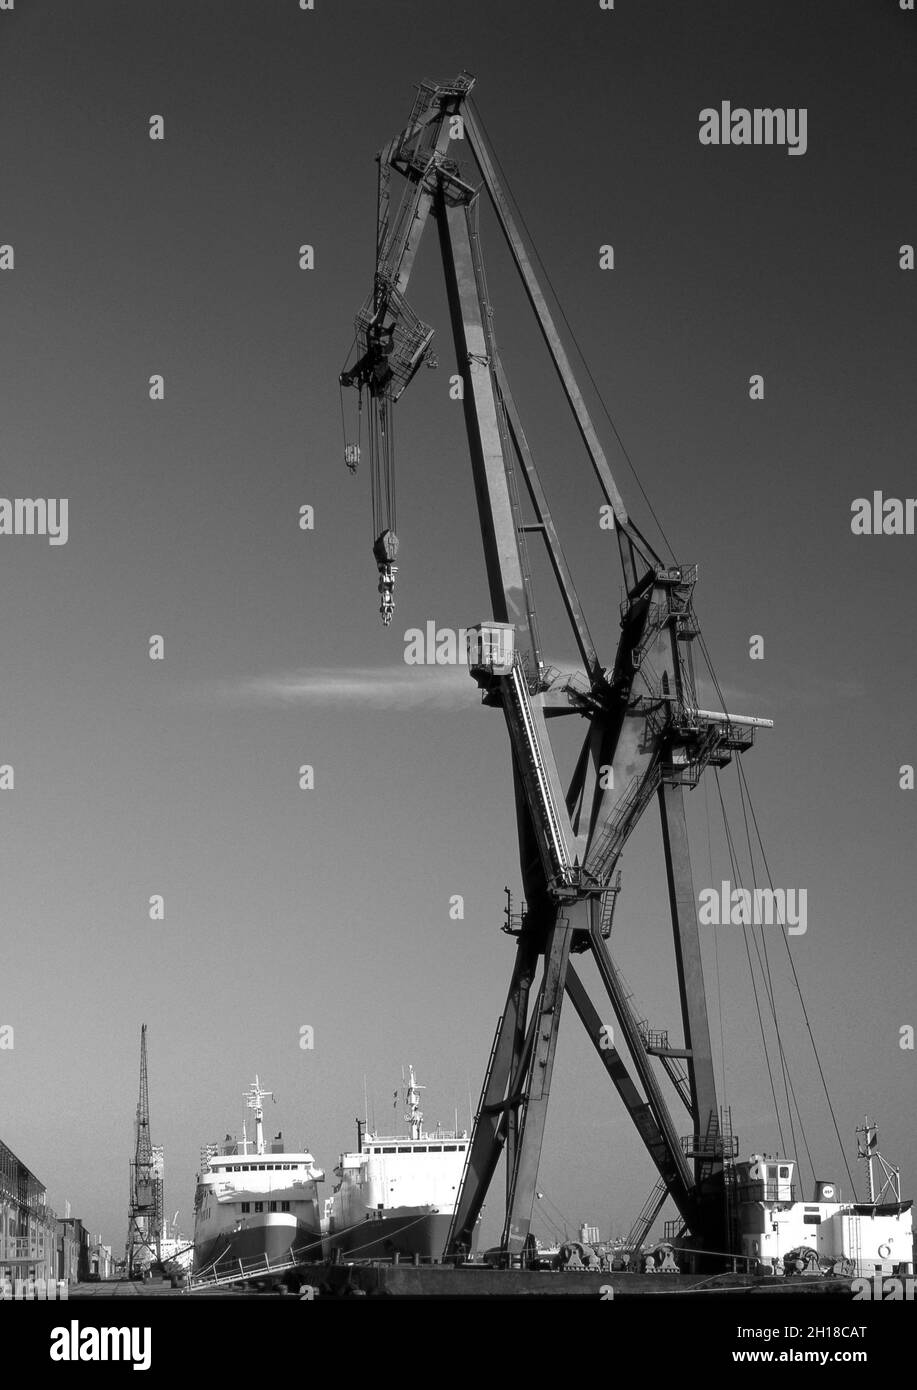 Canute heavy lifting floating crane operated by Associated British Ports docked in the New Docks Port of Southampton, with two Townsend Thoresen ferries in the background. Southampton, England, UK Stock Photo